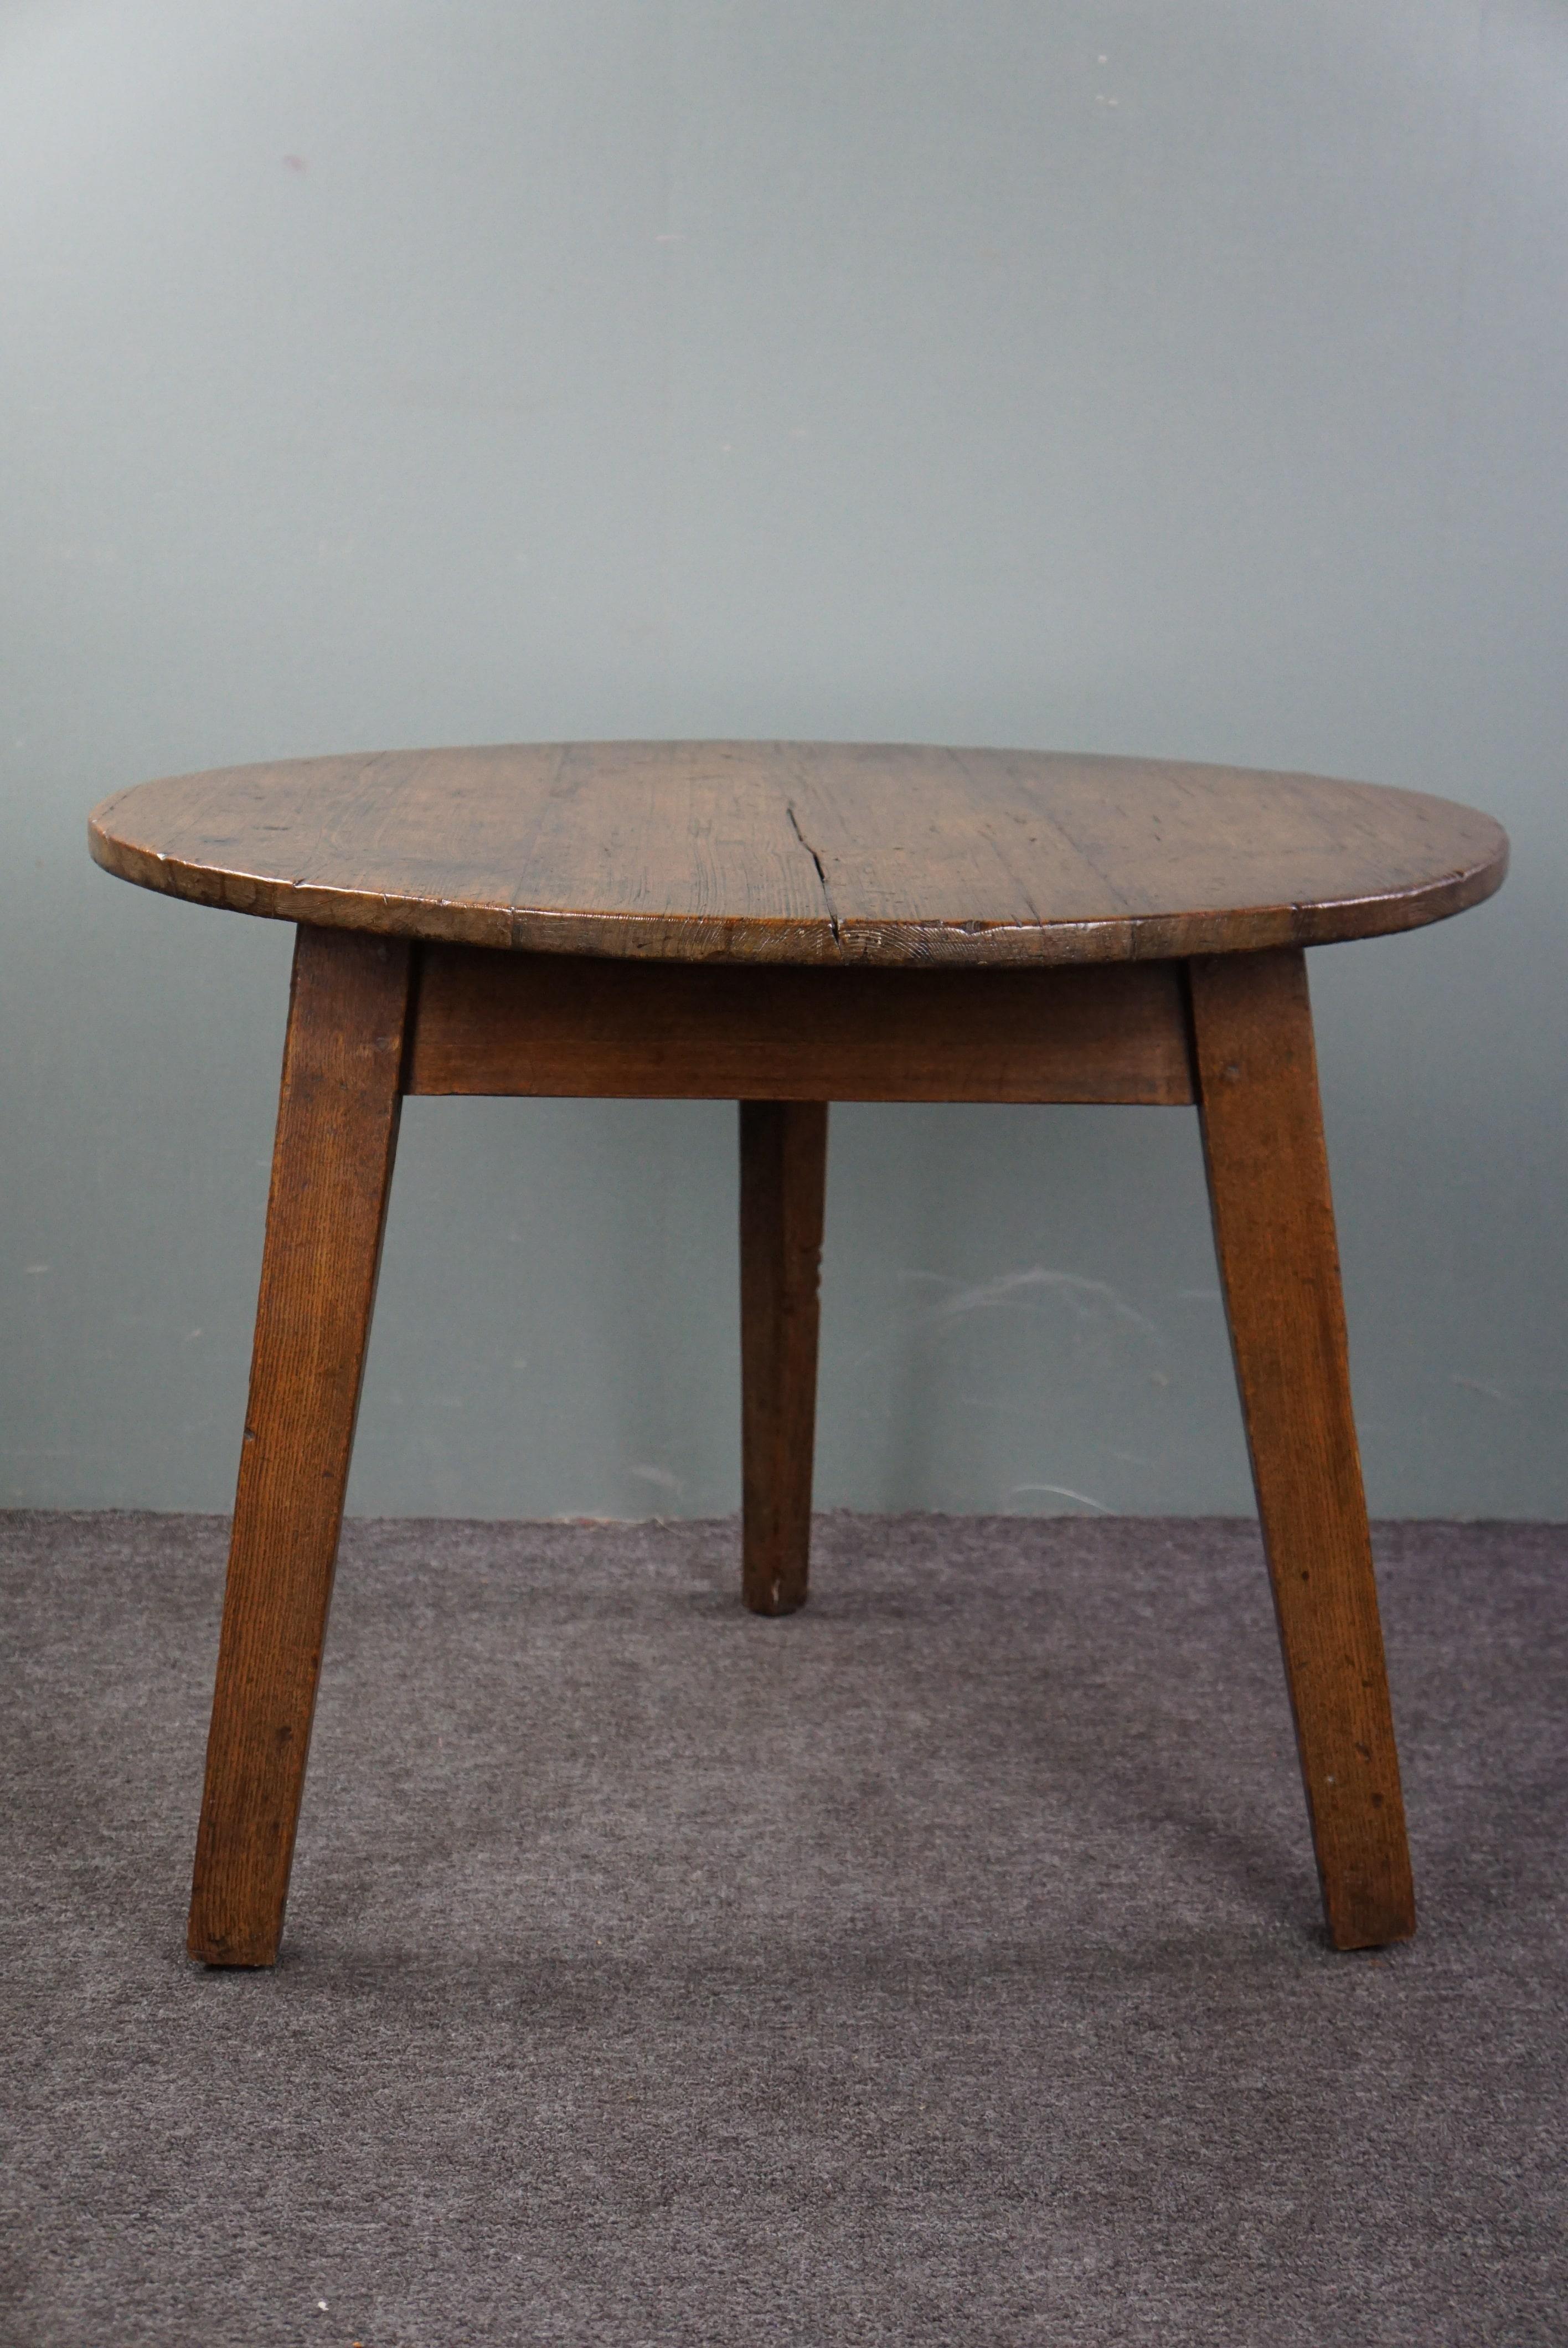 English pinewood Cricket table, late 18th century, country chic In Good Condition For Sale In Harderwijk, NL